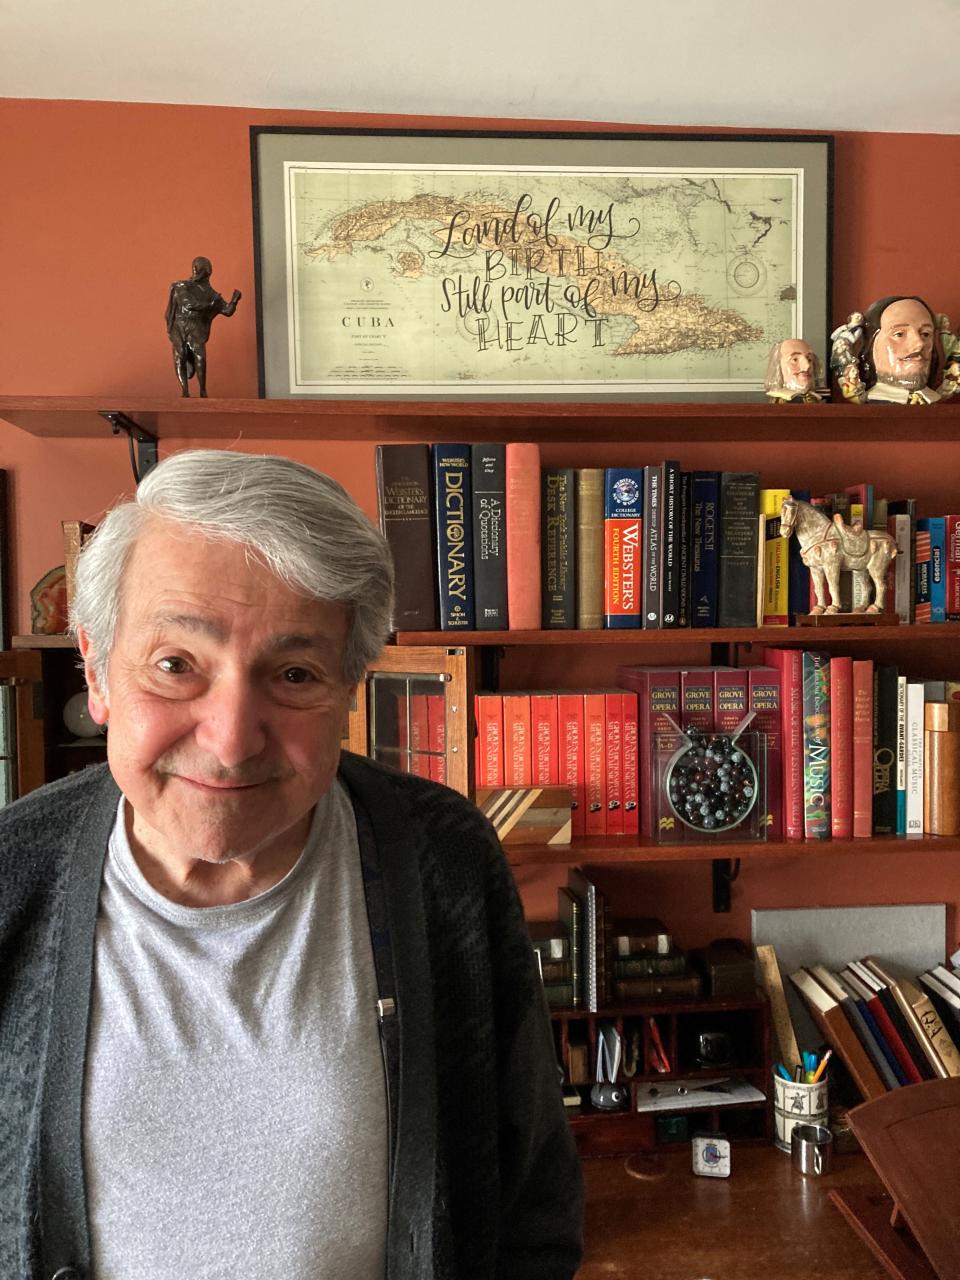 Rafael de Acha, a long-time musical performer and director, came to the United States as a teen Cuban refugee. His study has a map of Cuba that says: “Land of My Birth. Still Part of My Heart.”